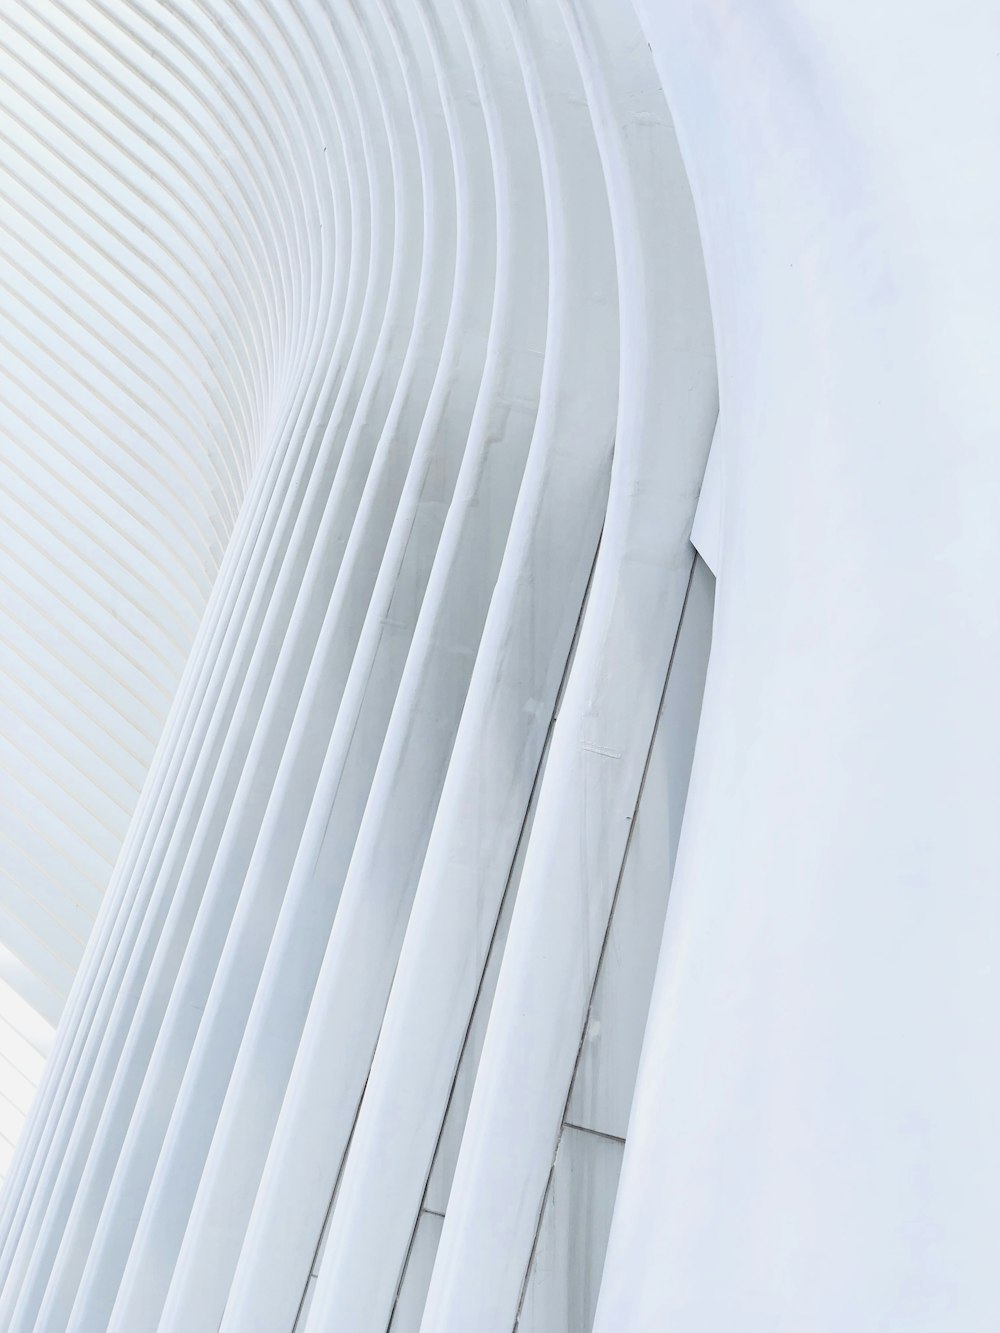 architectural photo of a white building